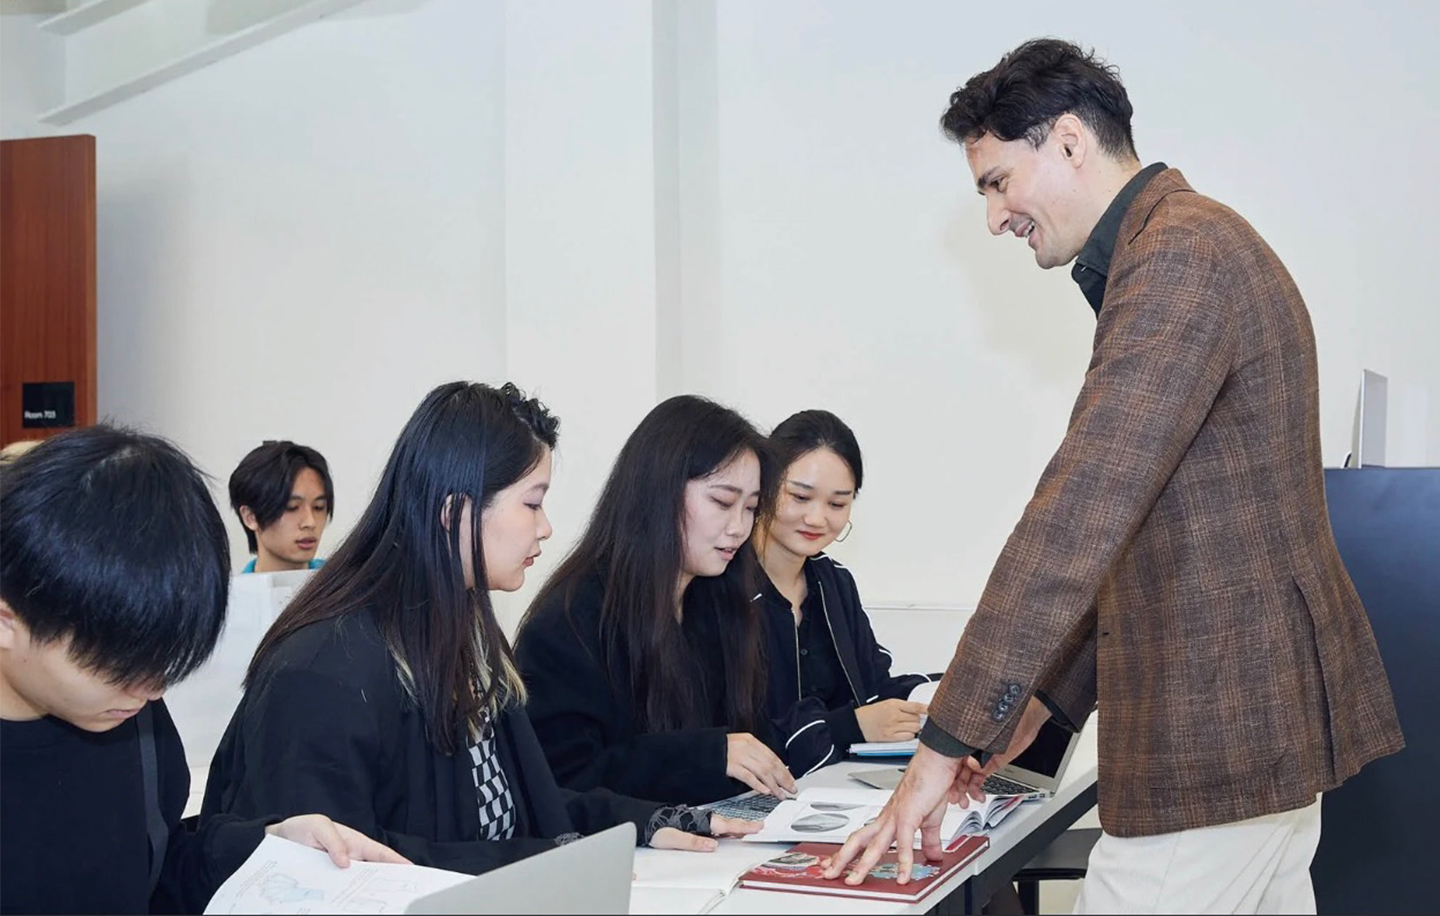 Students working with Professor Federico Castigliano during a creative writing lesson at Istituto Marangoni Shanghai